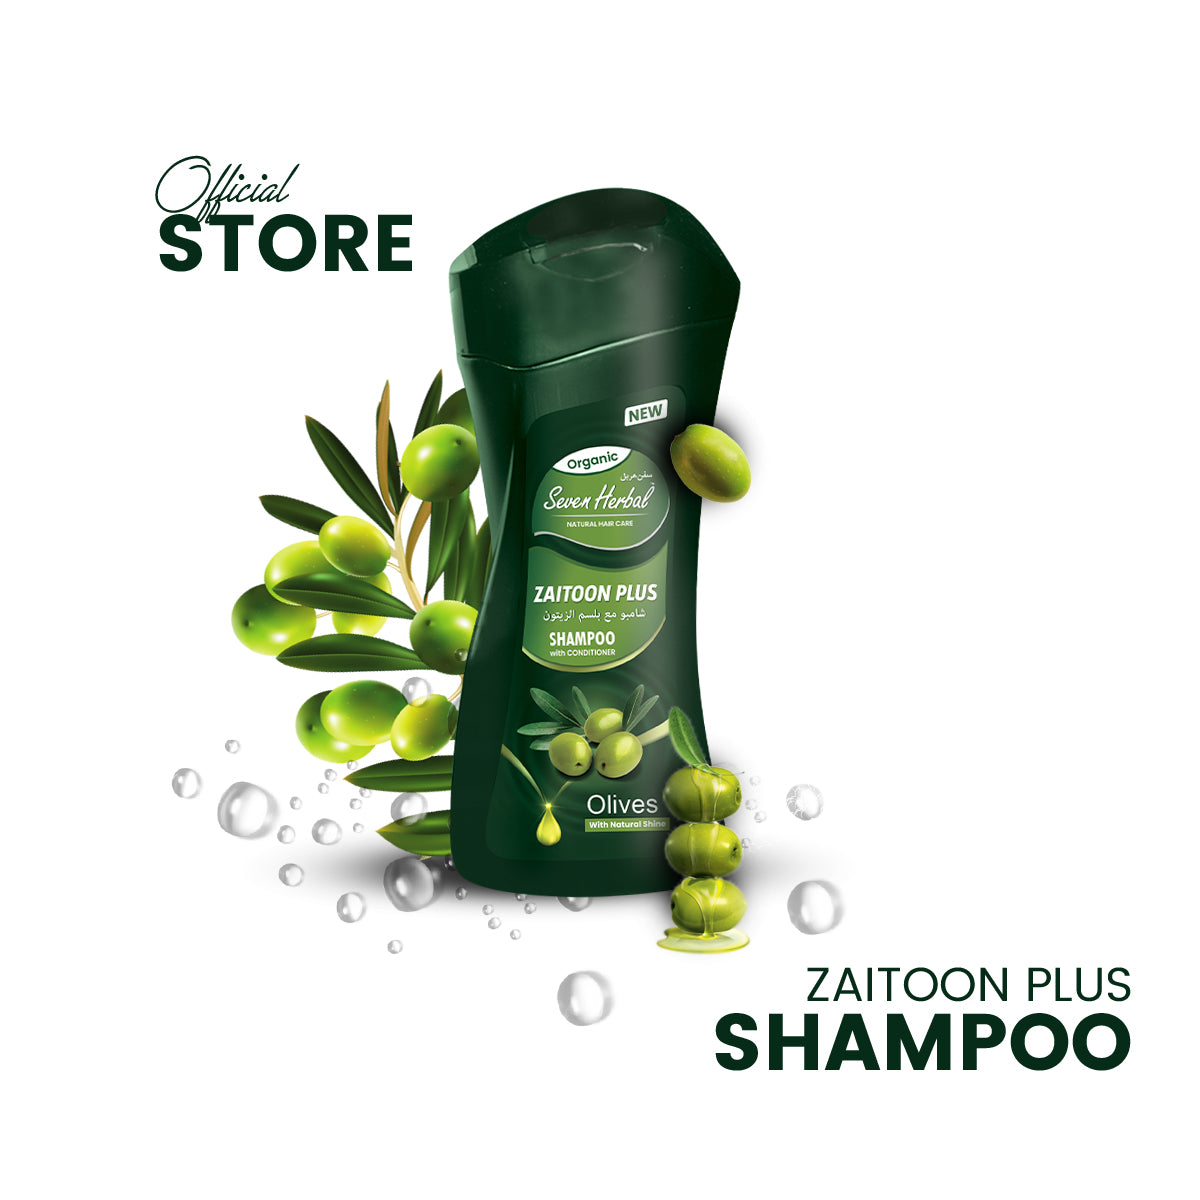 Seven Herbal Zaitoon Plus Shampoo with Conditioner